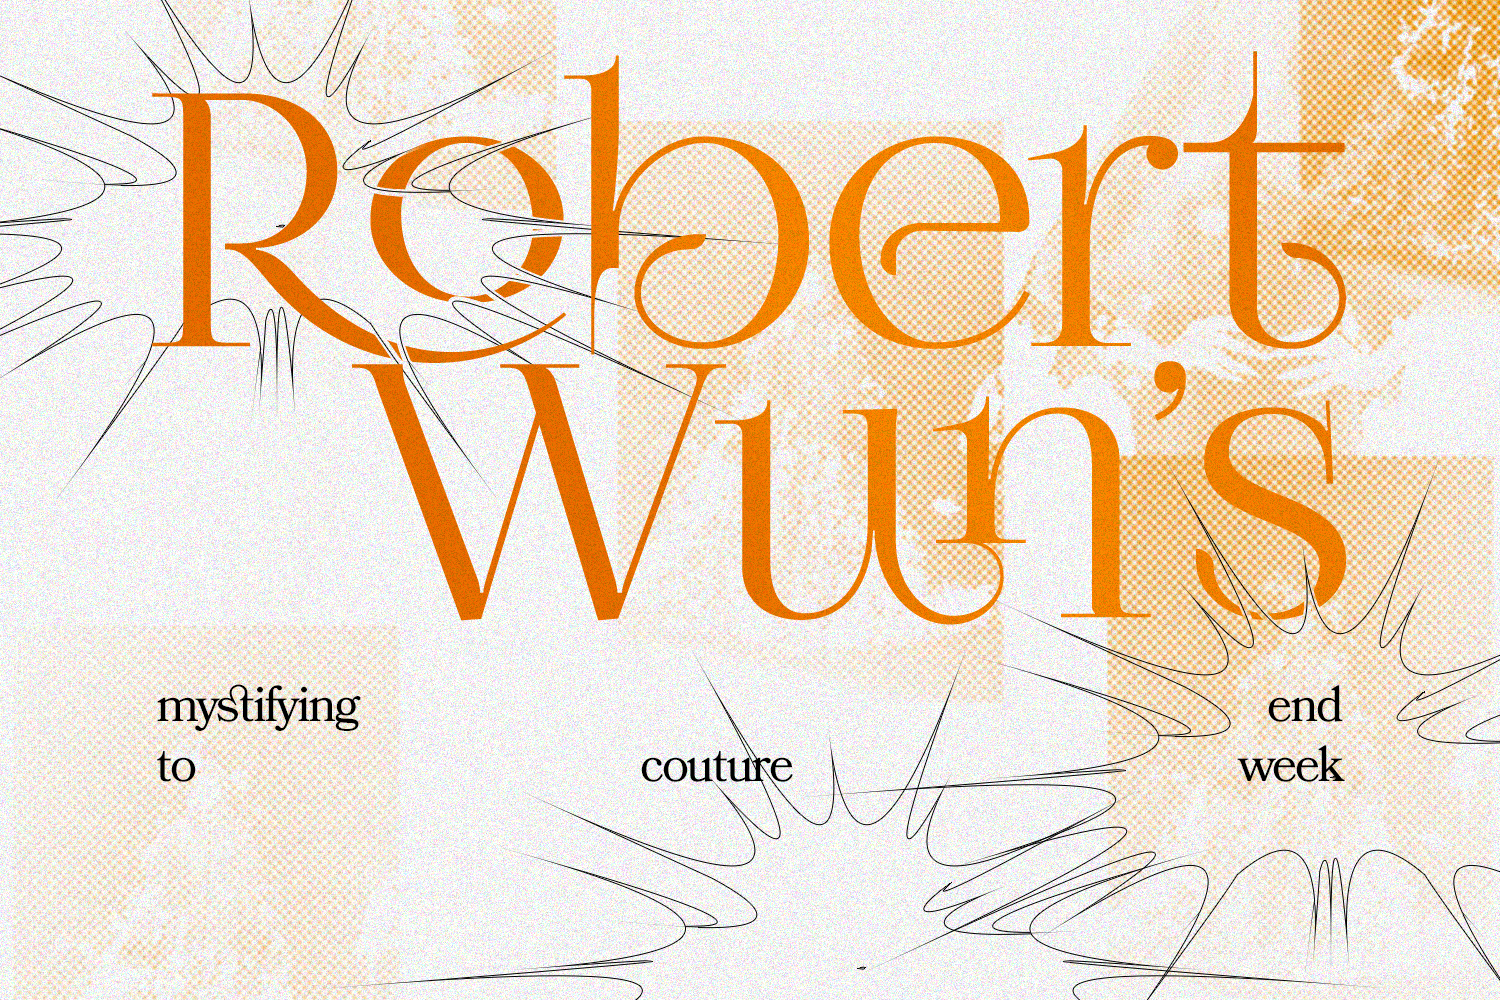 Robert Wun on the inspiration behind his Haute Couture Week debut